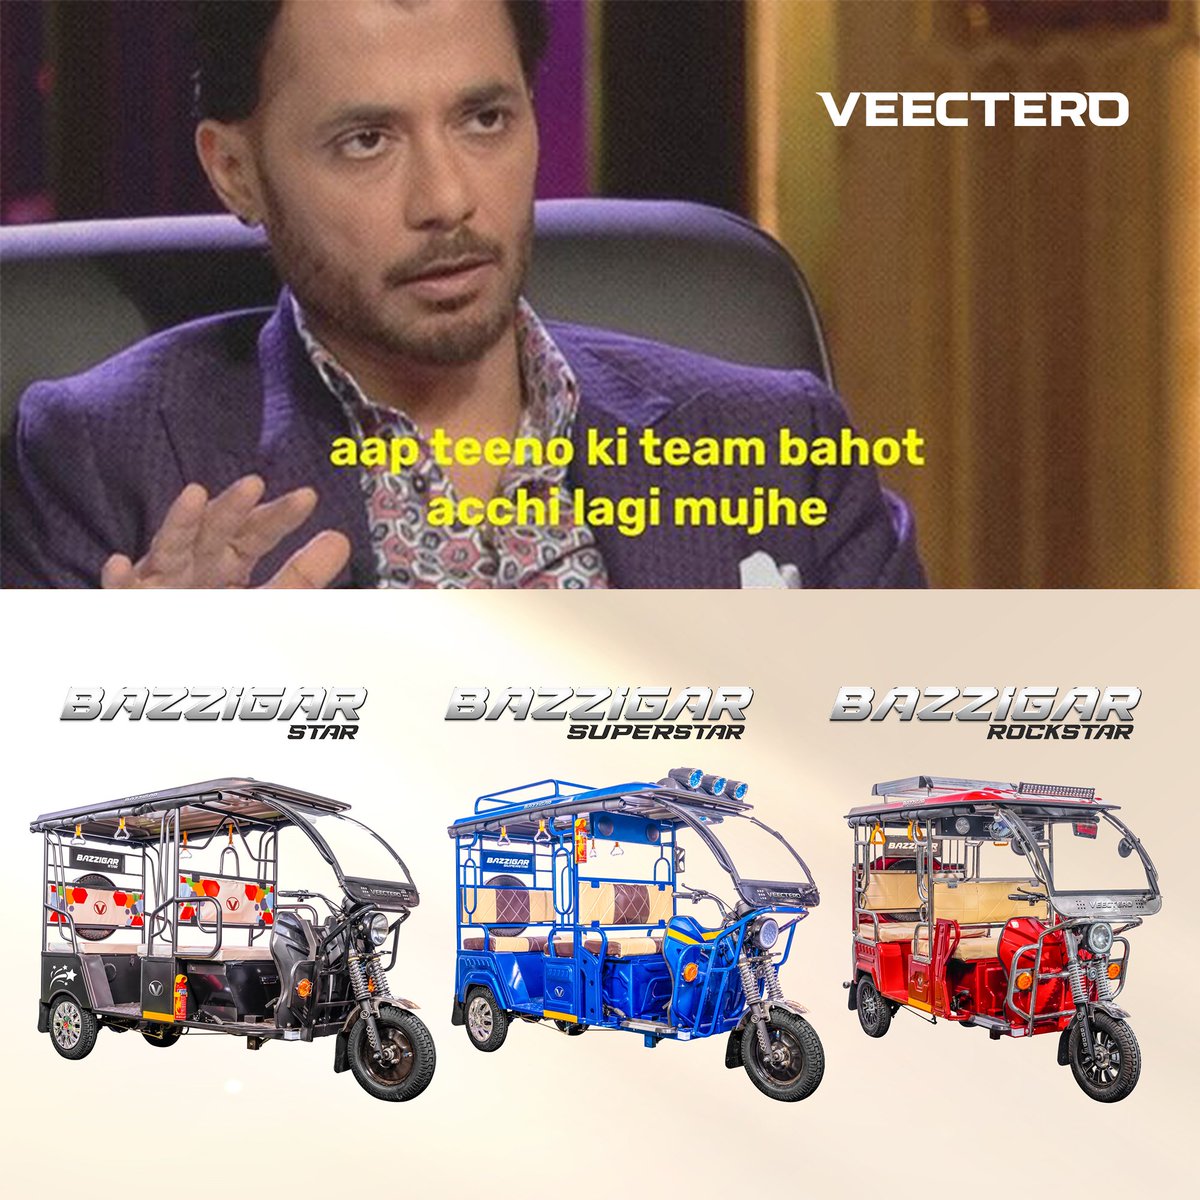 If Veectero Bazzigar were participants in Shark Tank India, they would have won the hearts of the sharks!

#Veectero #SwitchToVEV #sharktank #sharktankindia #sharktankmemes  #SwitchToEV #eVehicles #ElectricVehicle #SustainableFuture #ElectricAuto #ElectricRickshaw